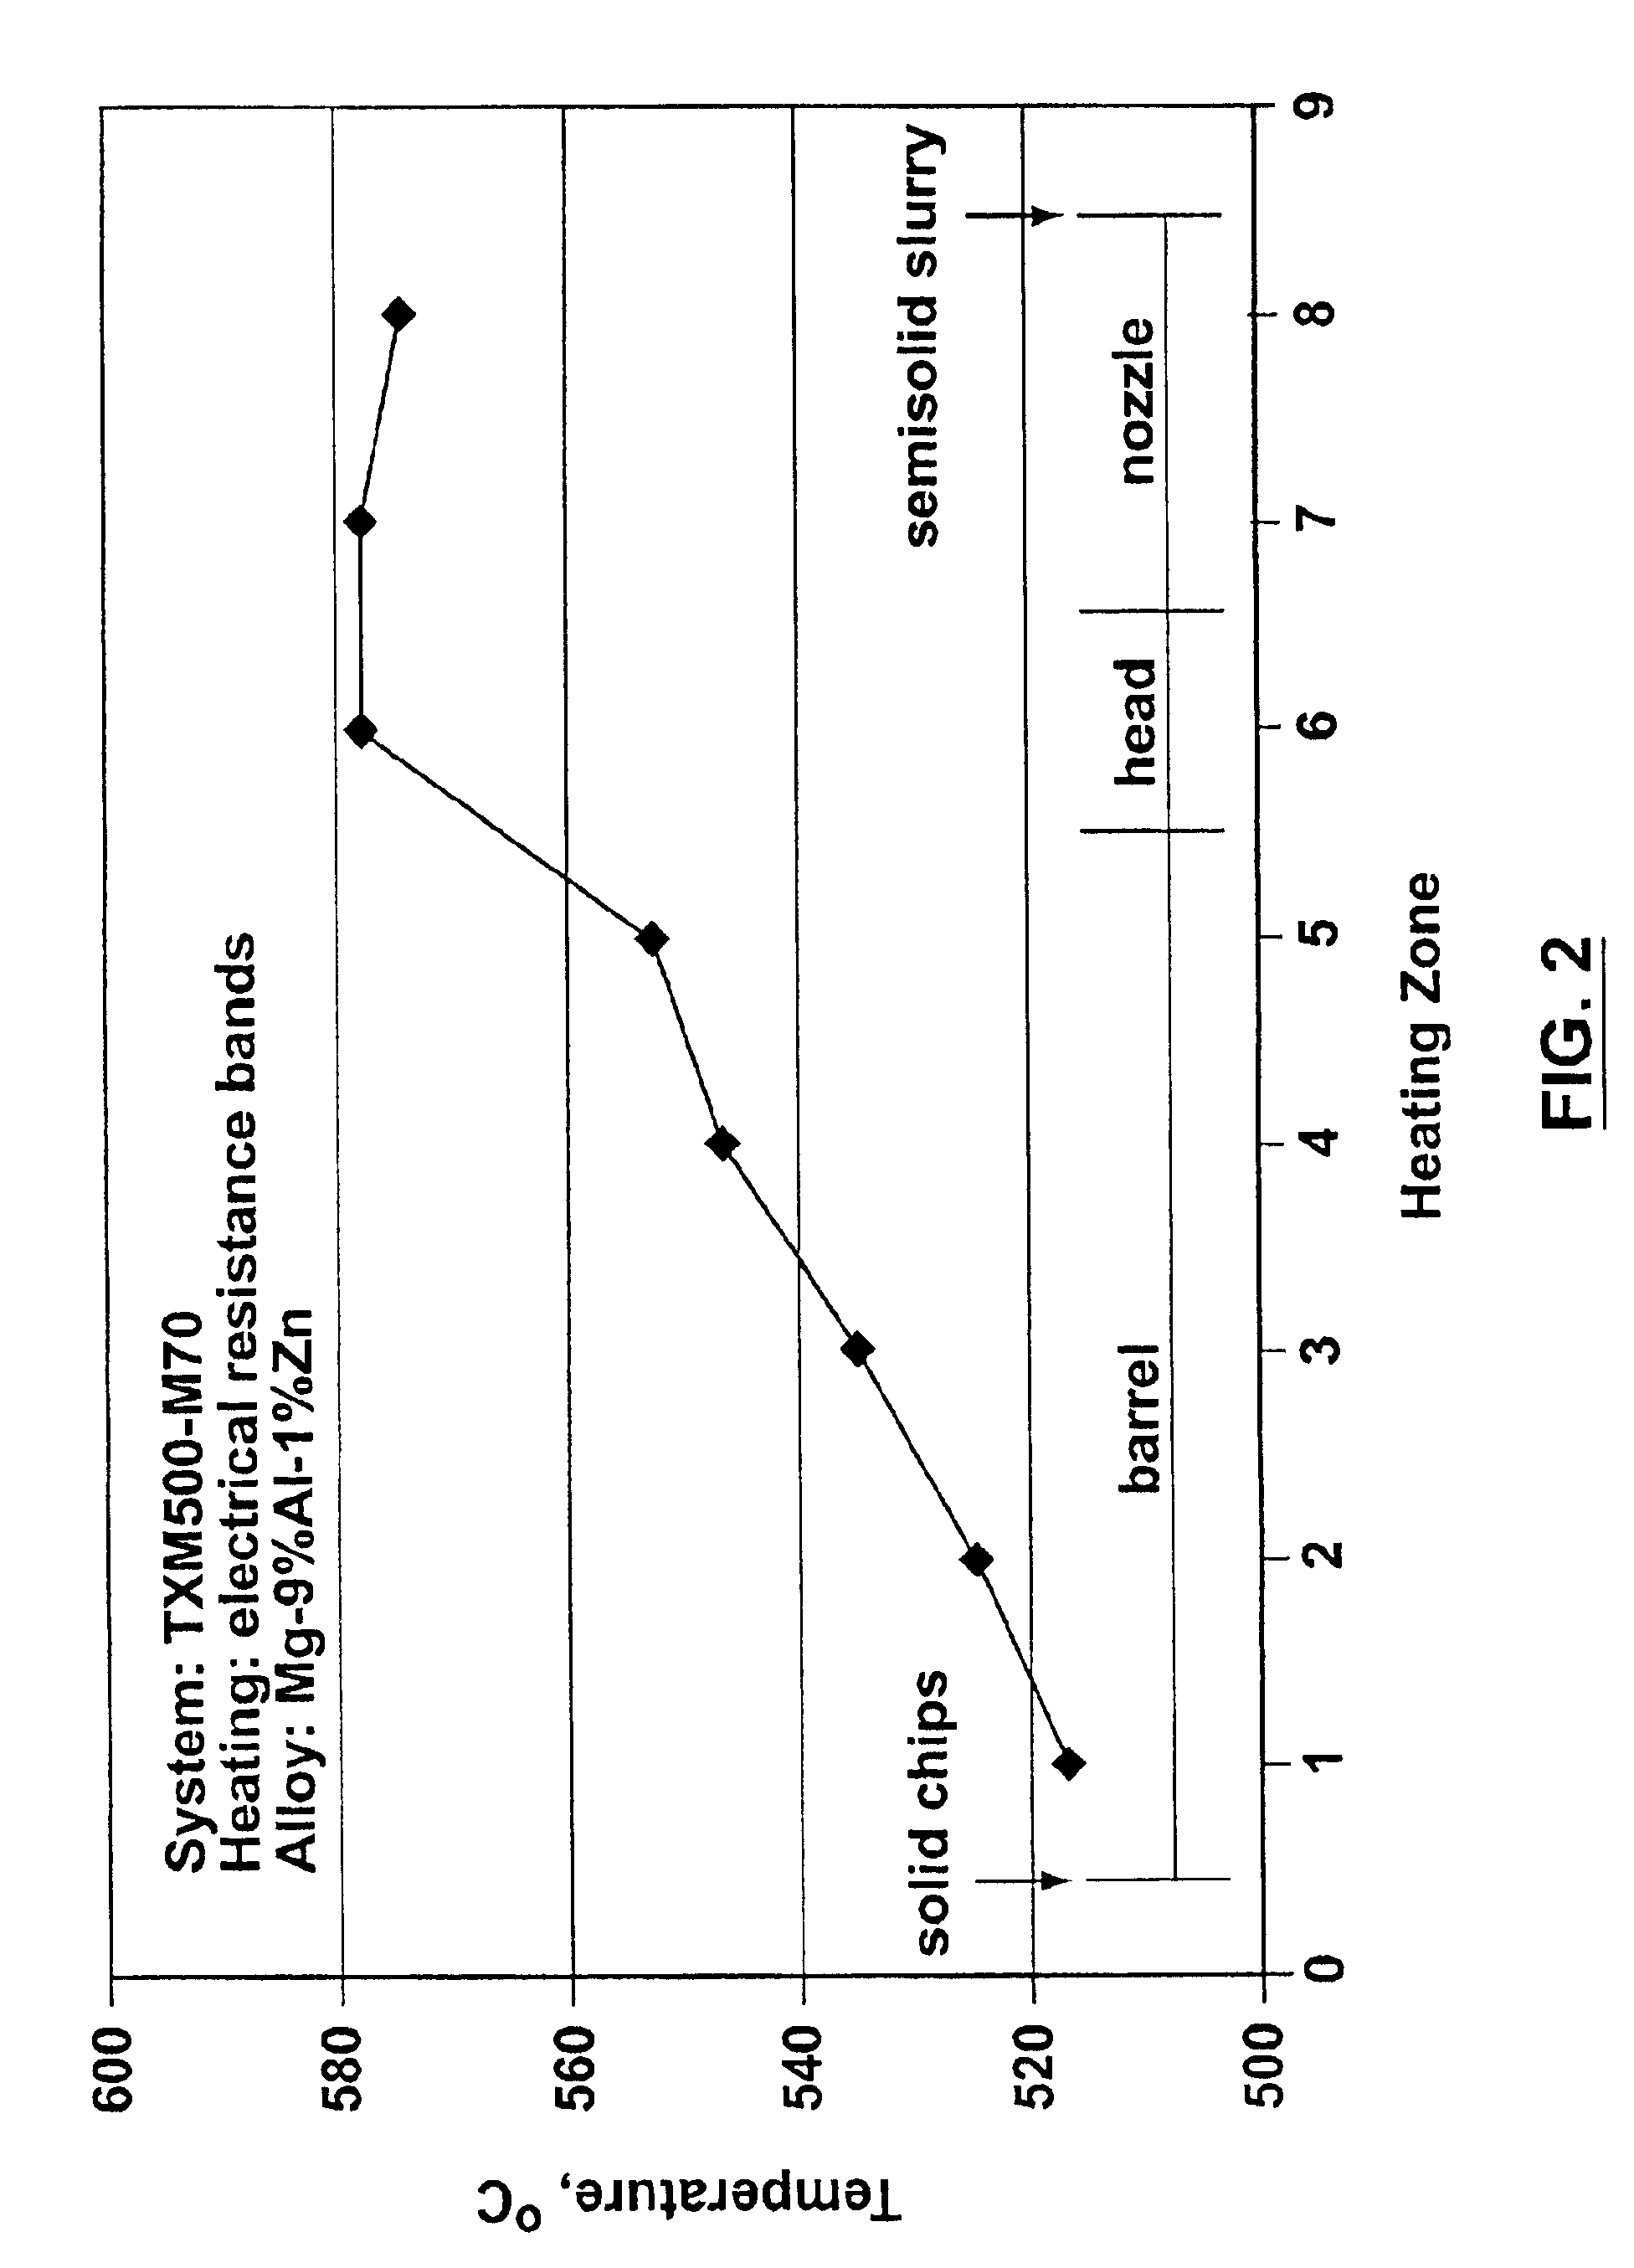 Process for injection molding semi-solid alloys